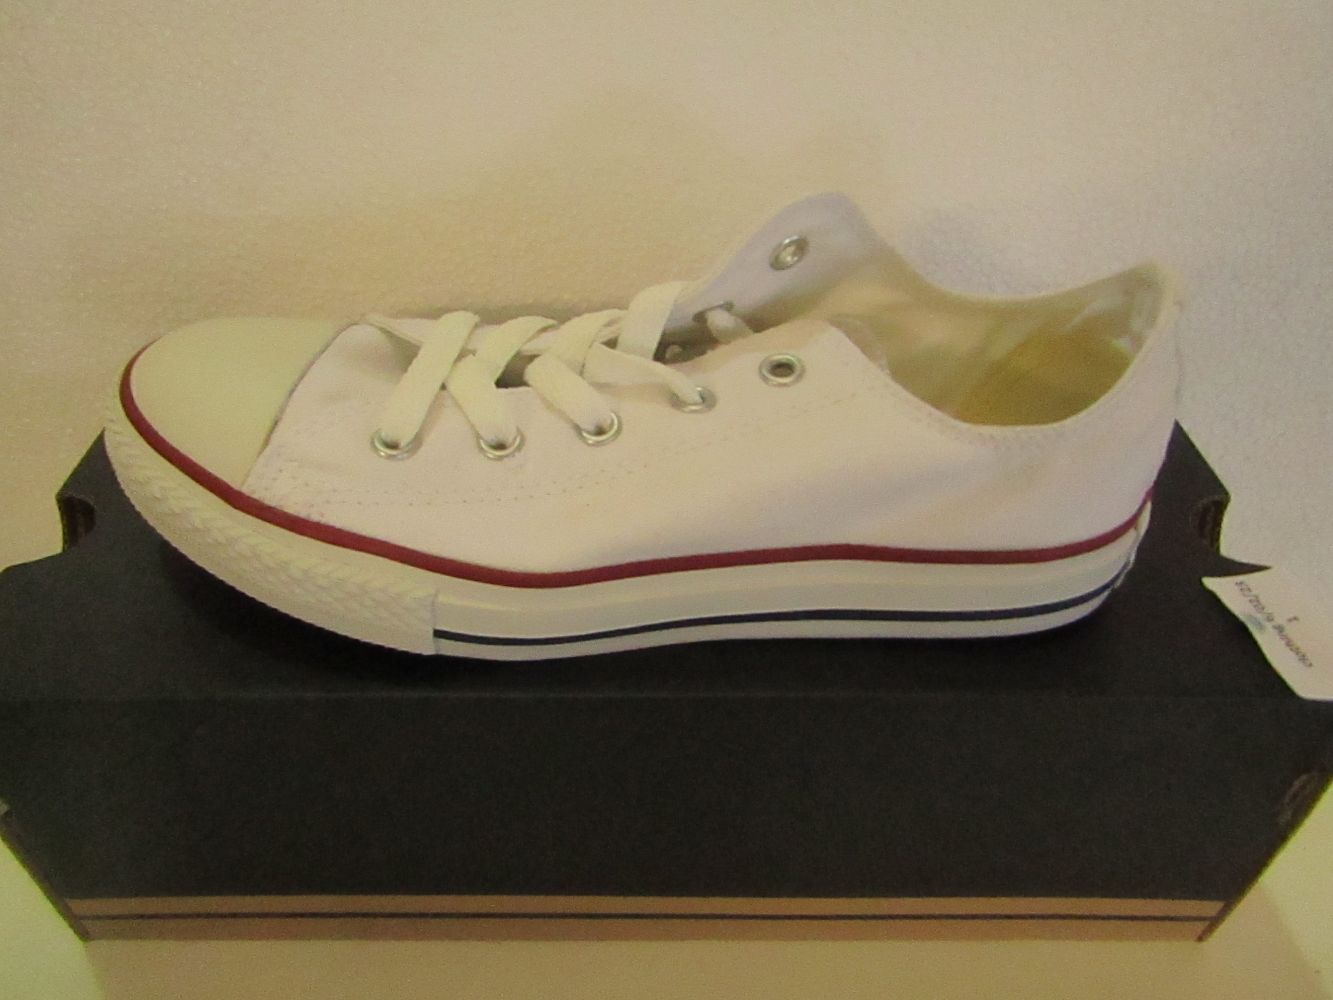 Converse all stars in various sizes, styles and materials starting as low as £12